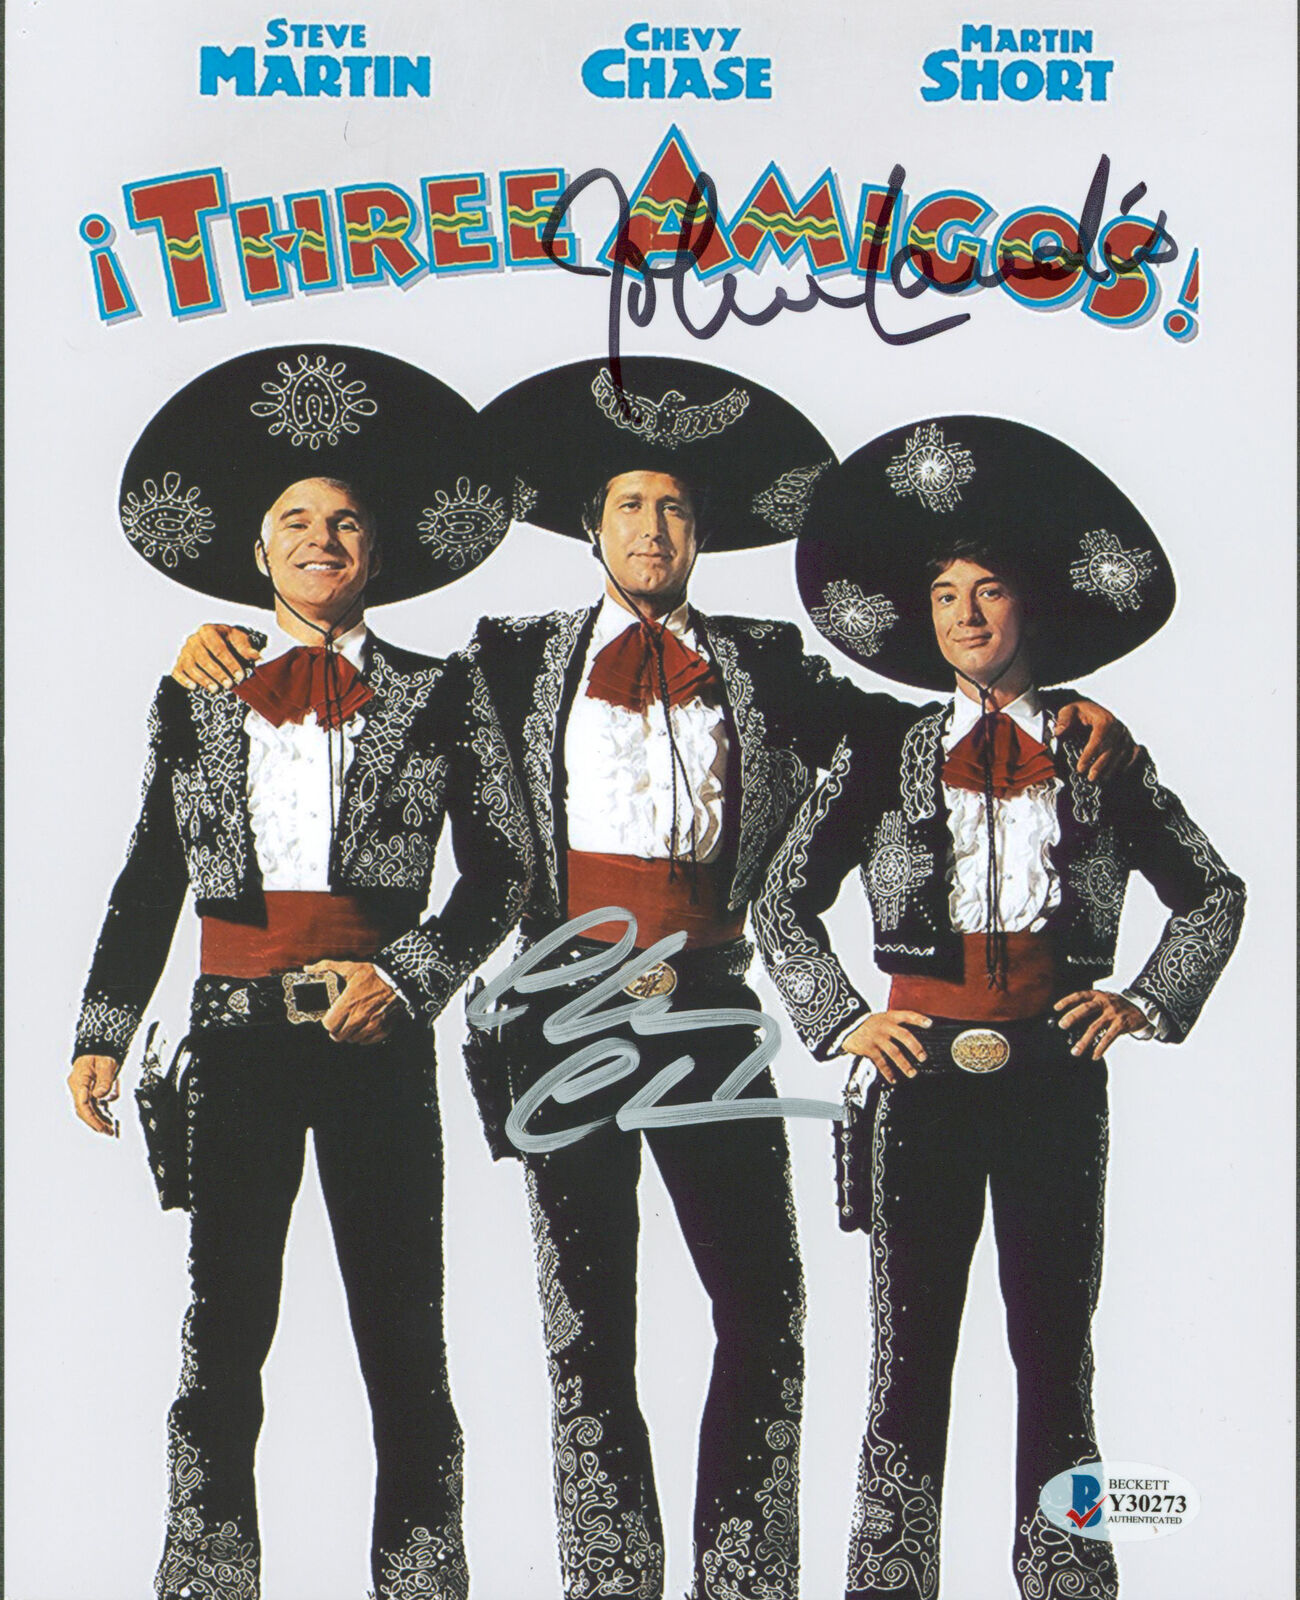 Chevy Chase & John Landis Three Amigos! Authentic Signed 8x10 Photo Poster painting BAS #Y30273